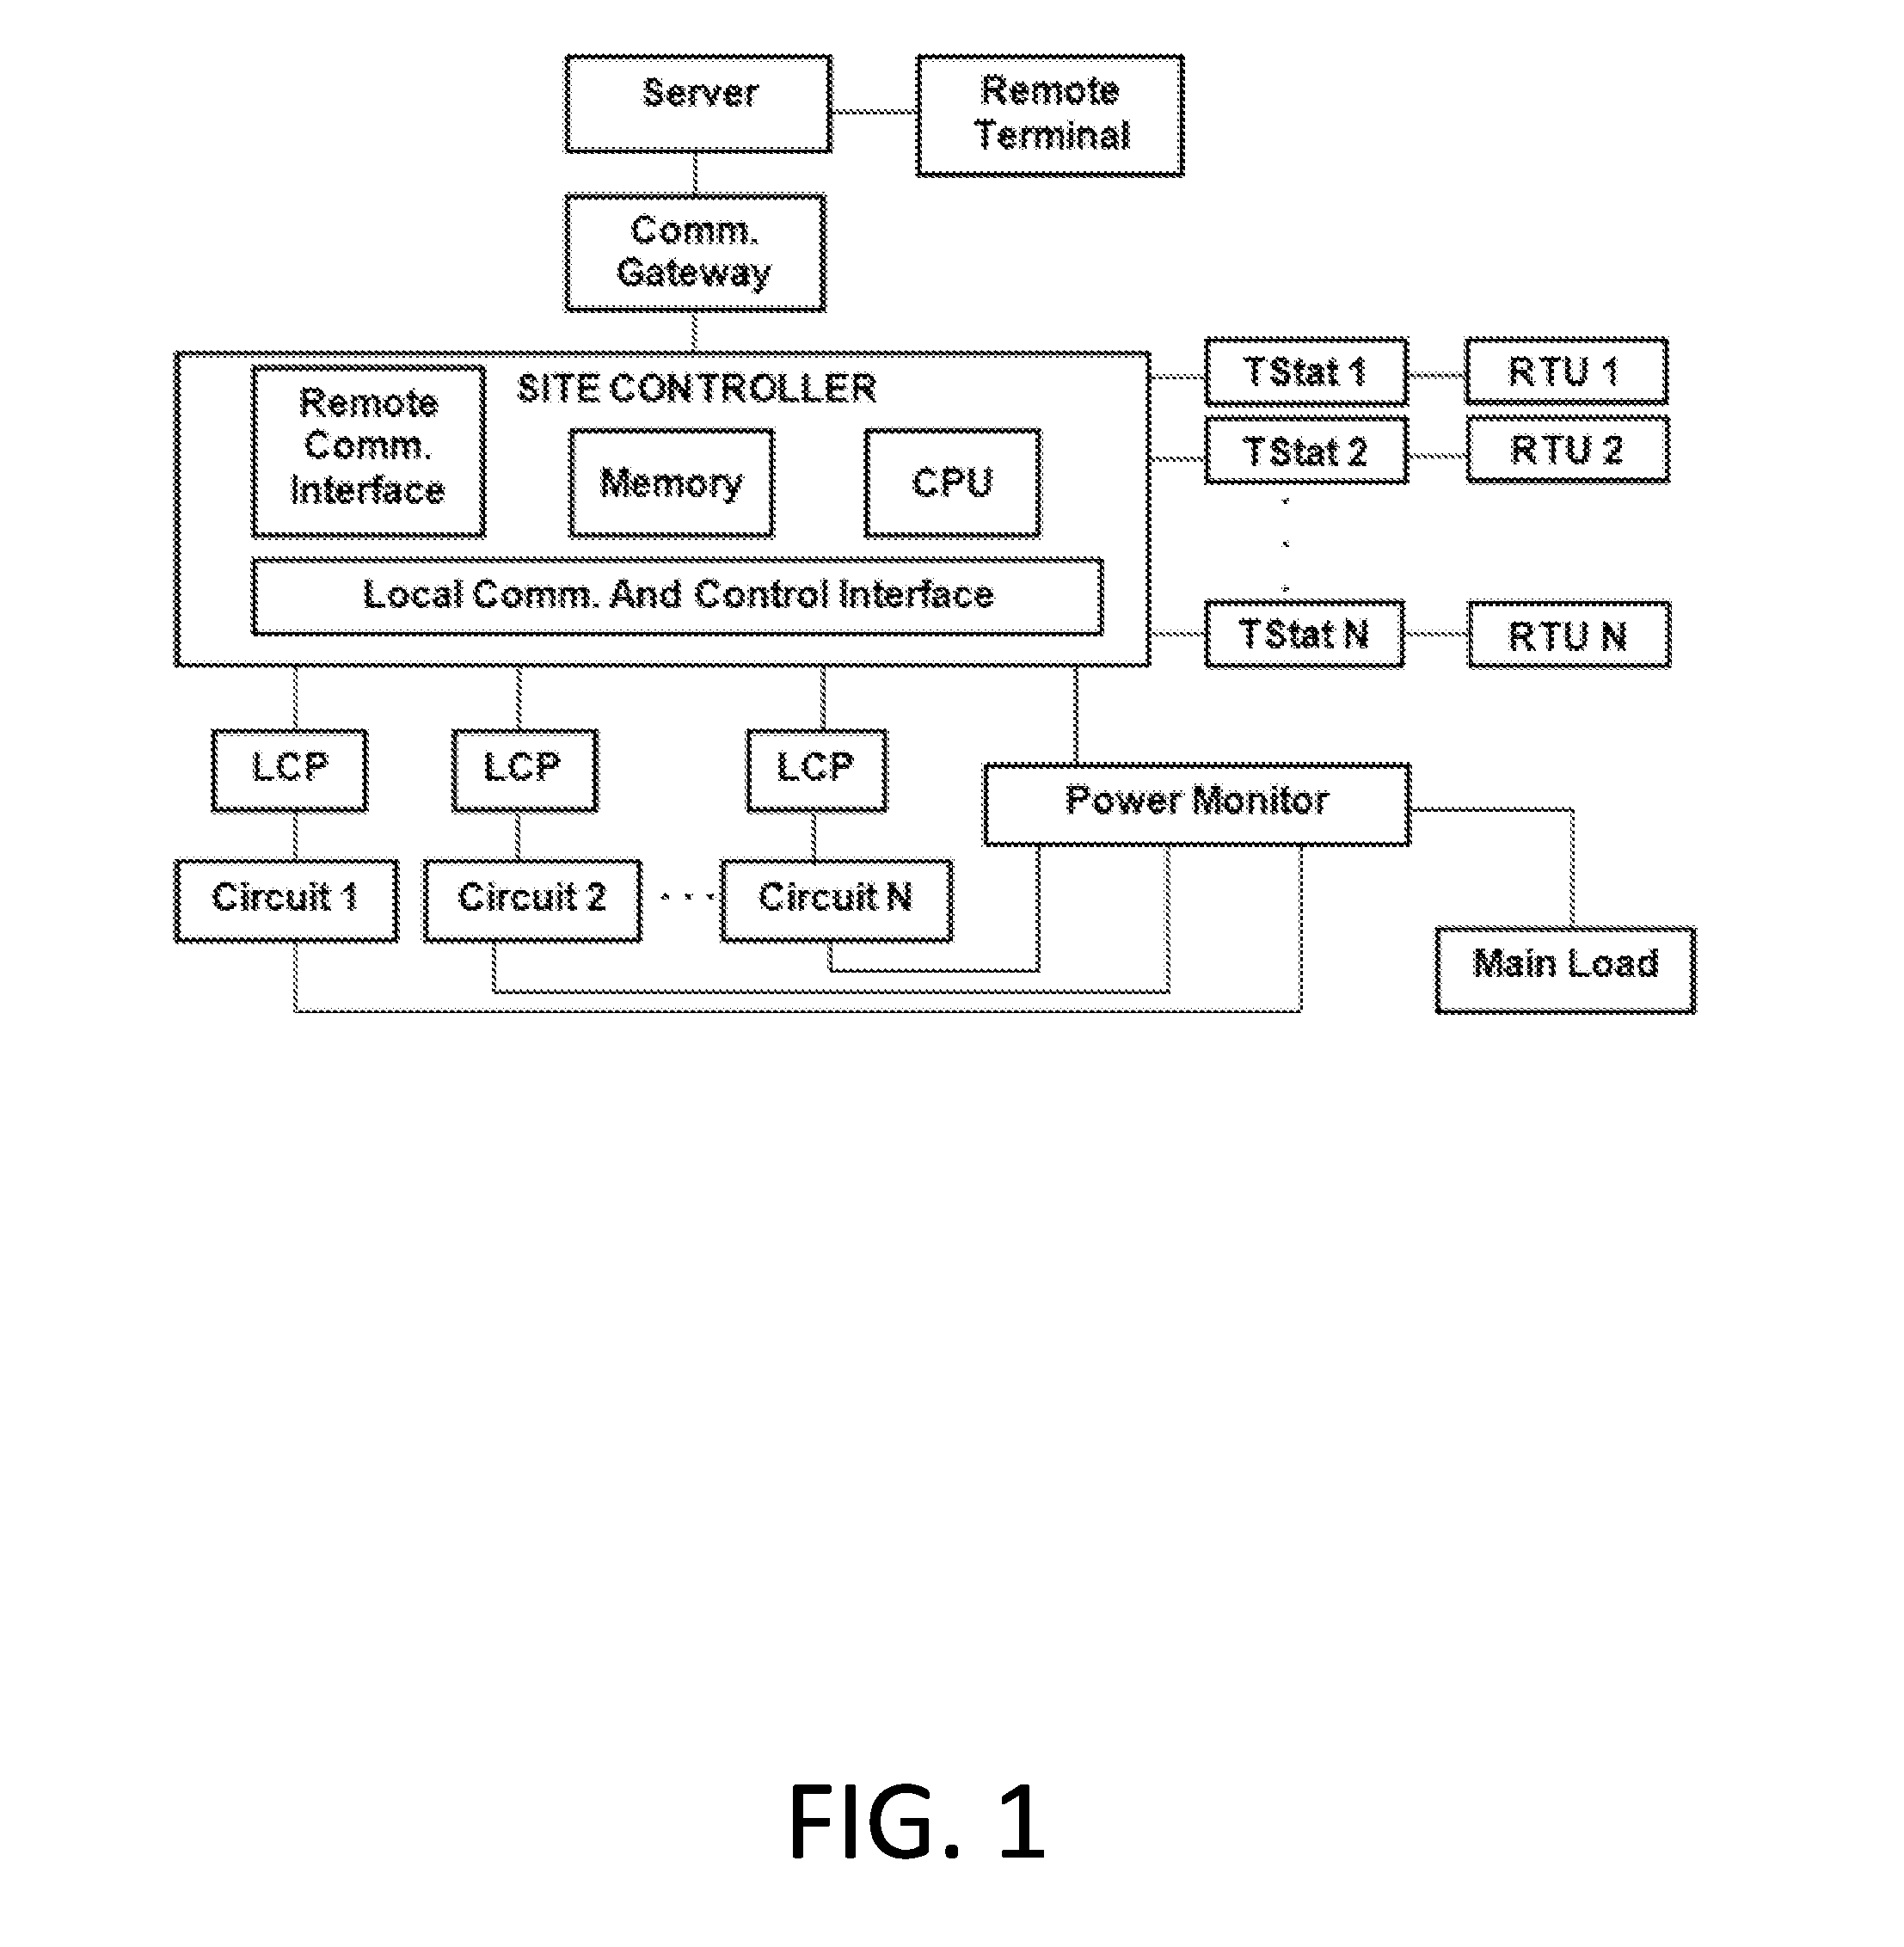 Controlling the setback and setback recovery of a power-consuming device